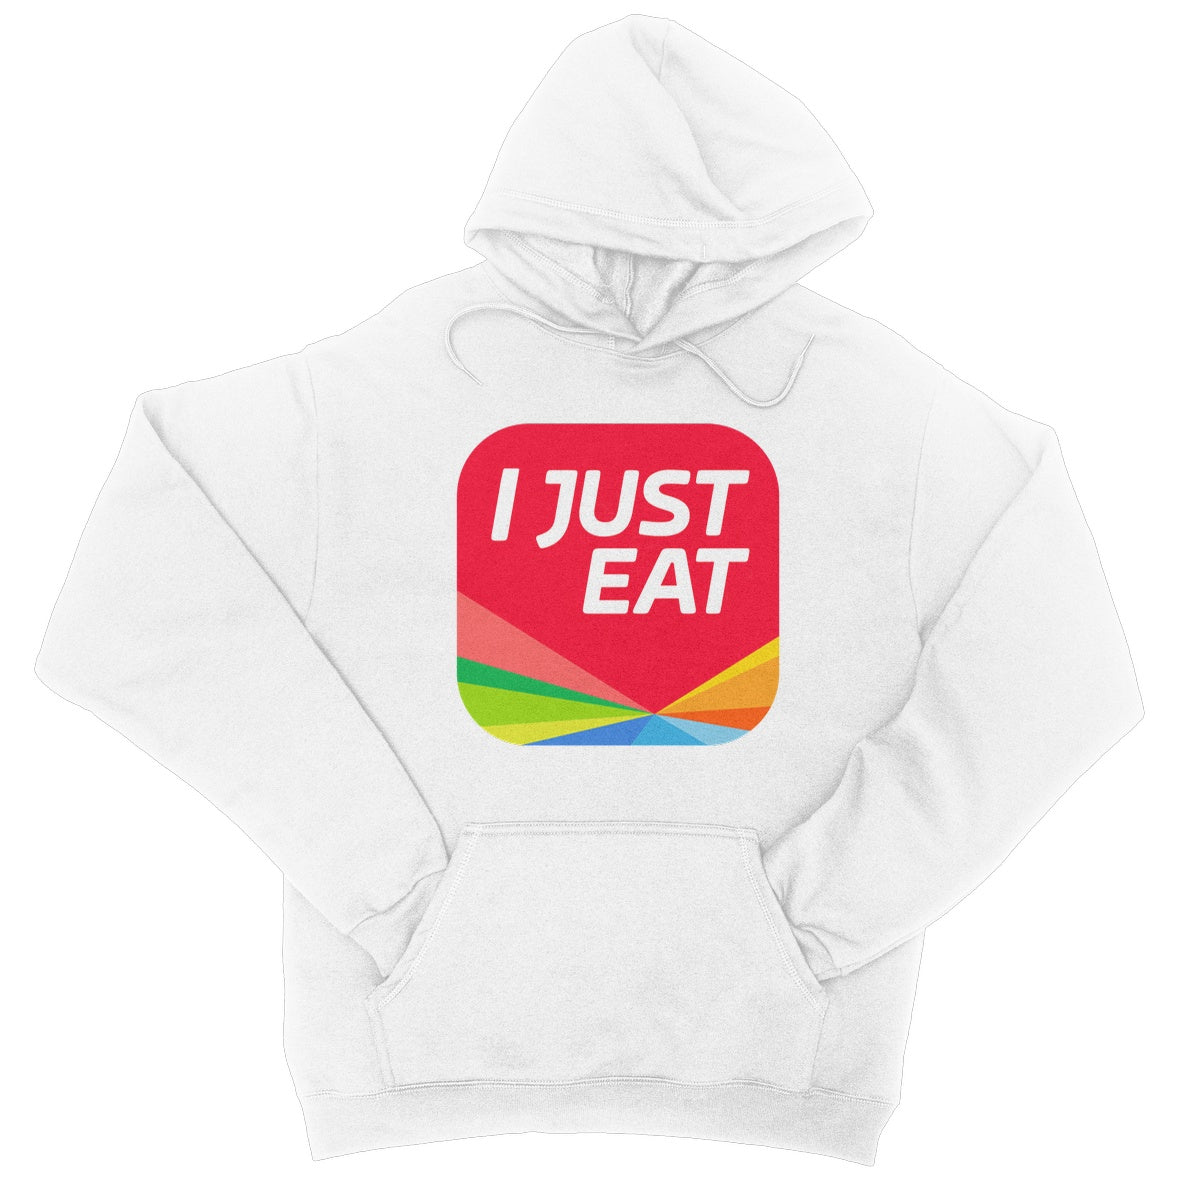 I just eat t hoodie white